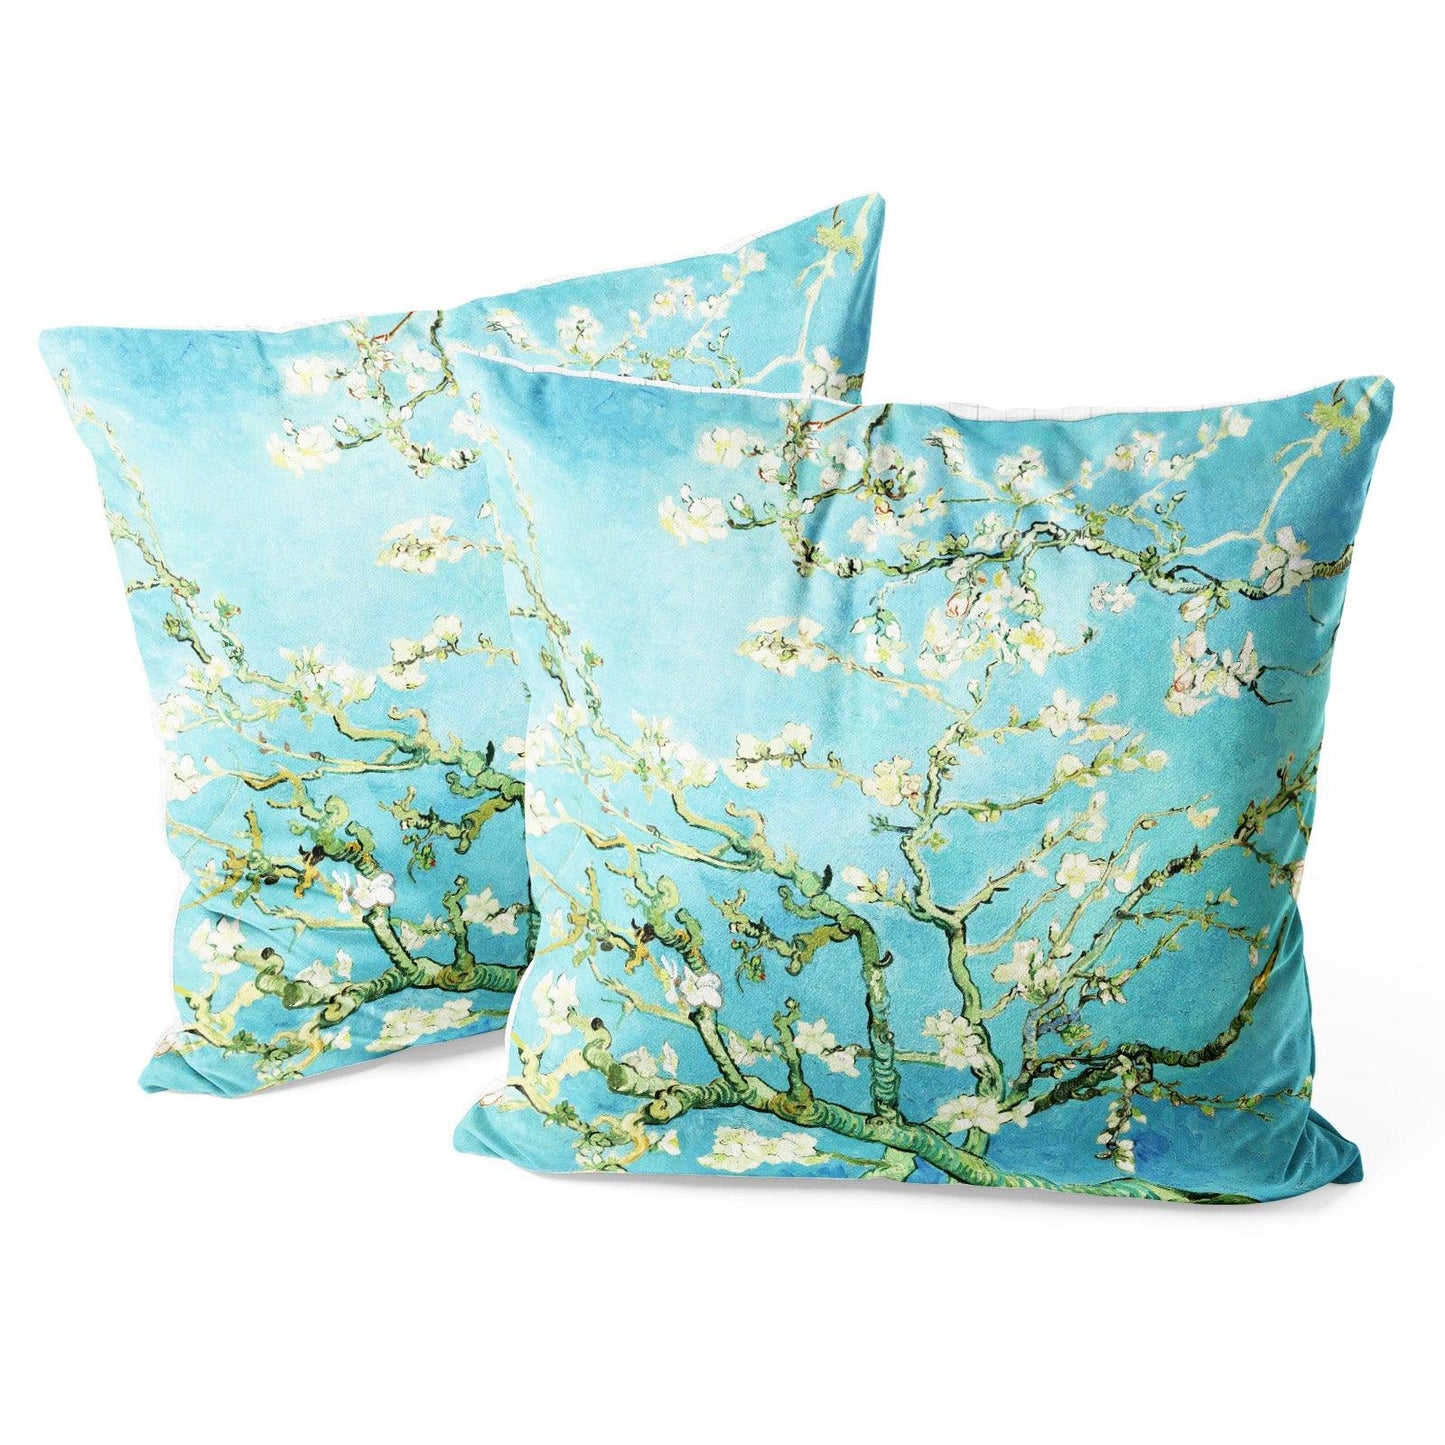 Art Flower Throw Pillow Covers Pack of 2 18x18 Inch (Almond Blossom by Vincent Van Gogh) - Berkin Arts